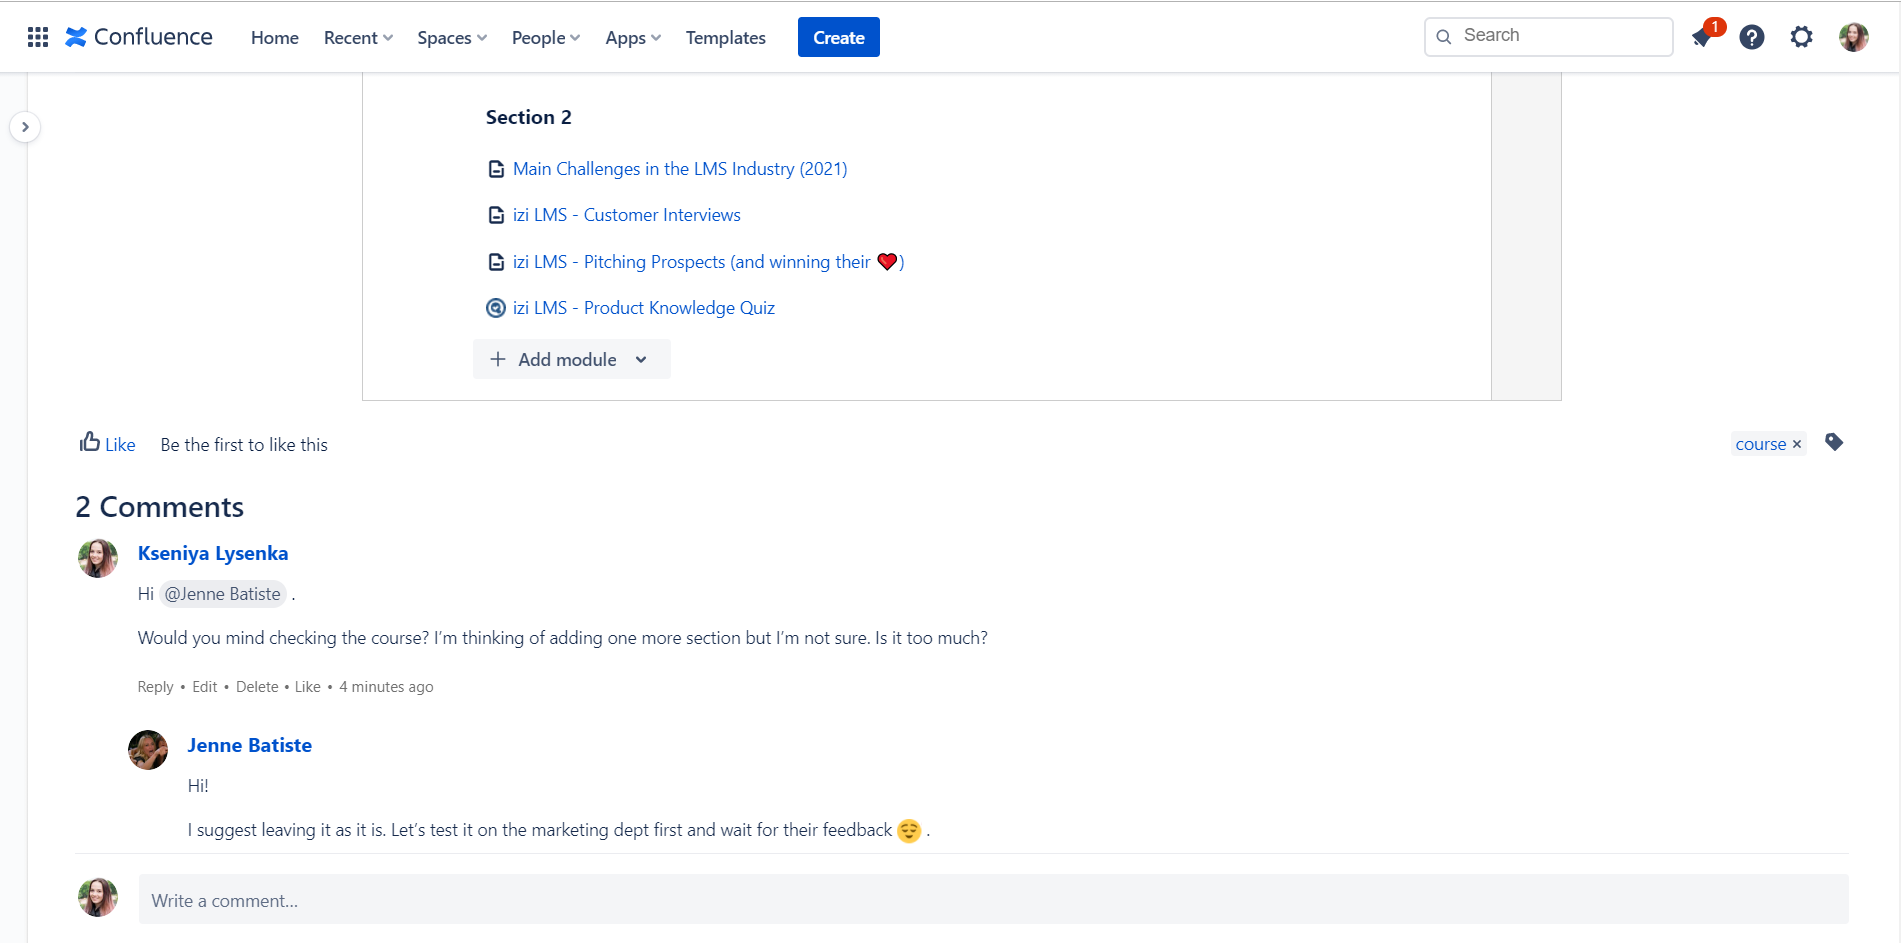 collaborate on training content in Confluence